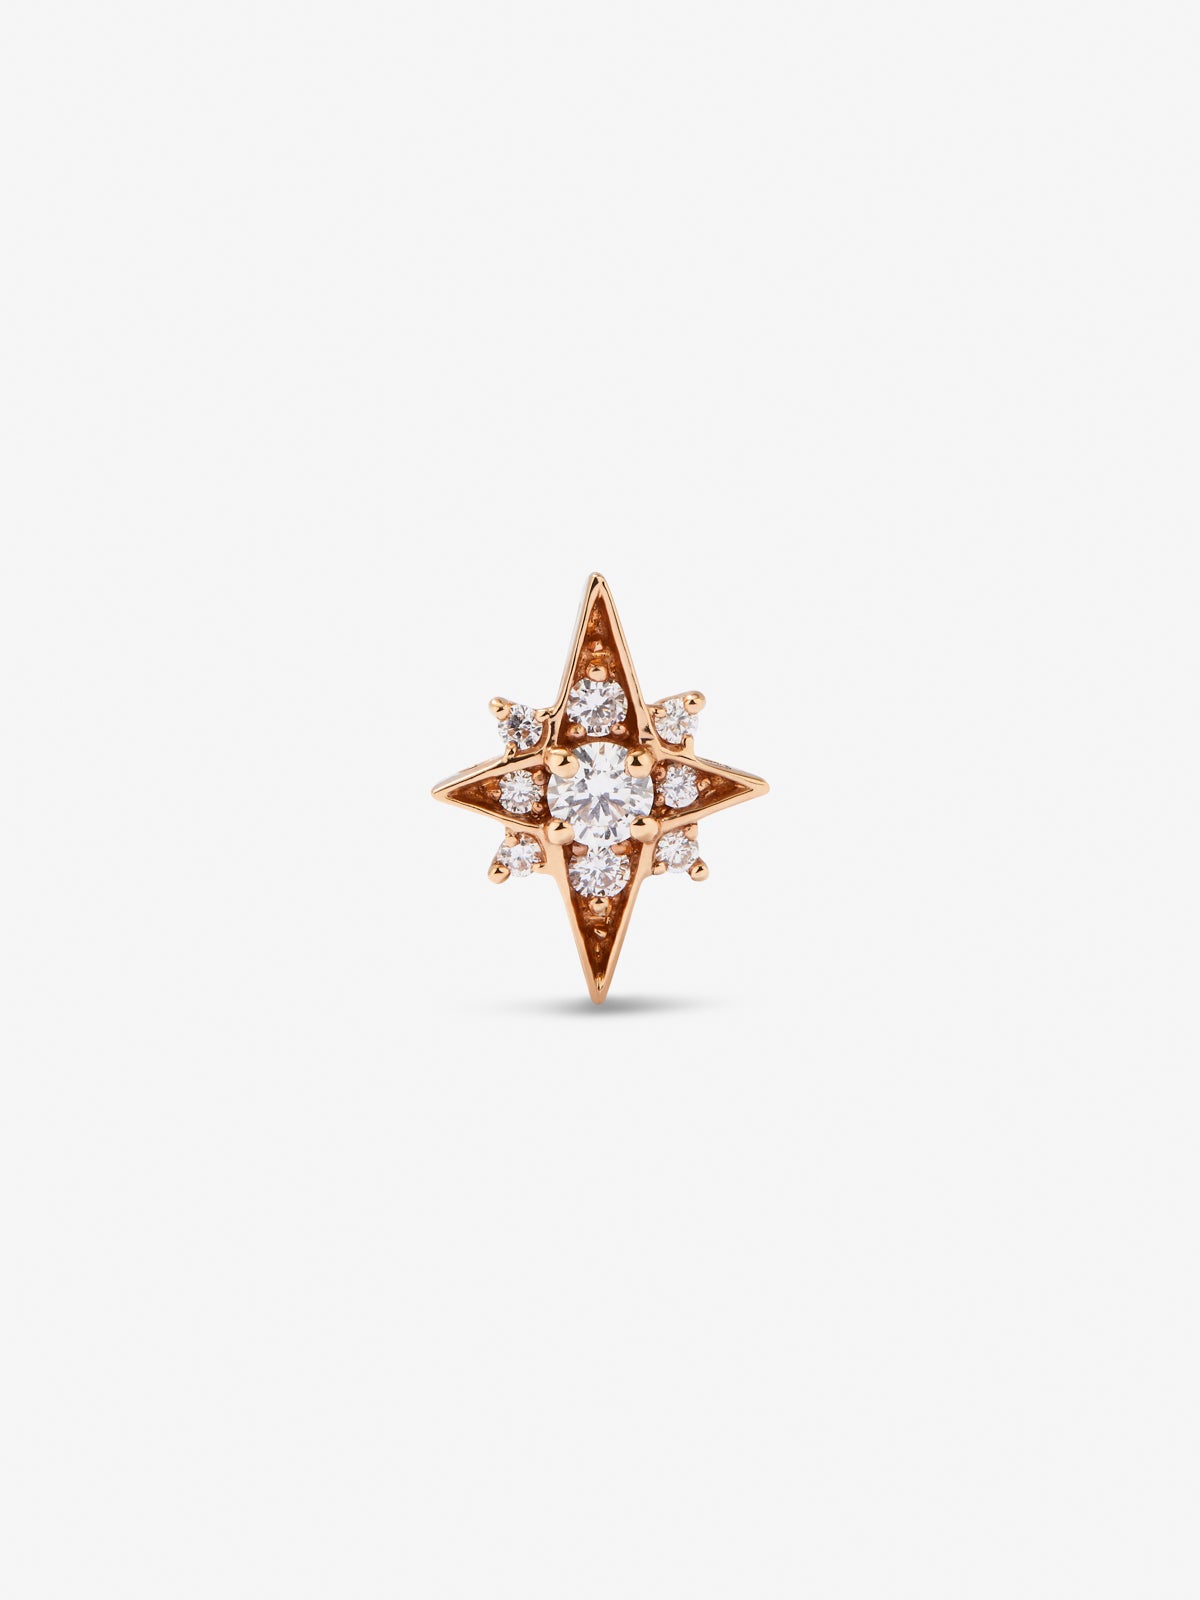 Individual 18K rose gold earring with 9 brilliant-cut diamonds with a total of 0.09 in the shape of a star